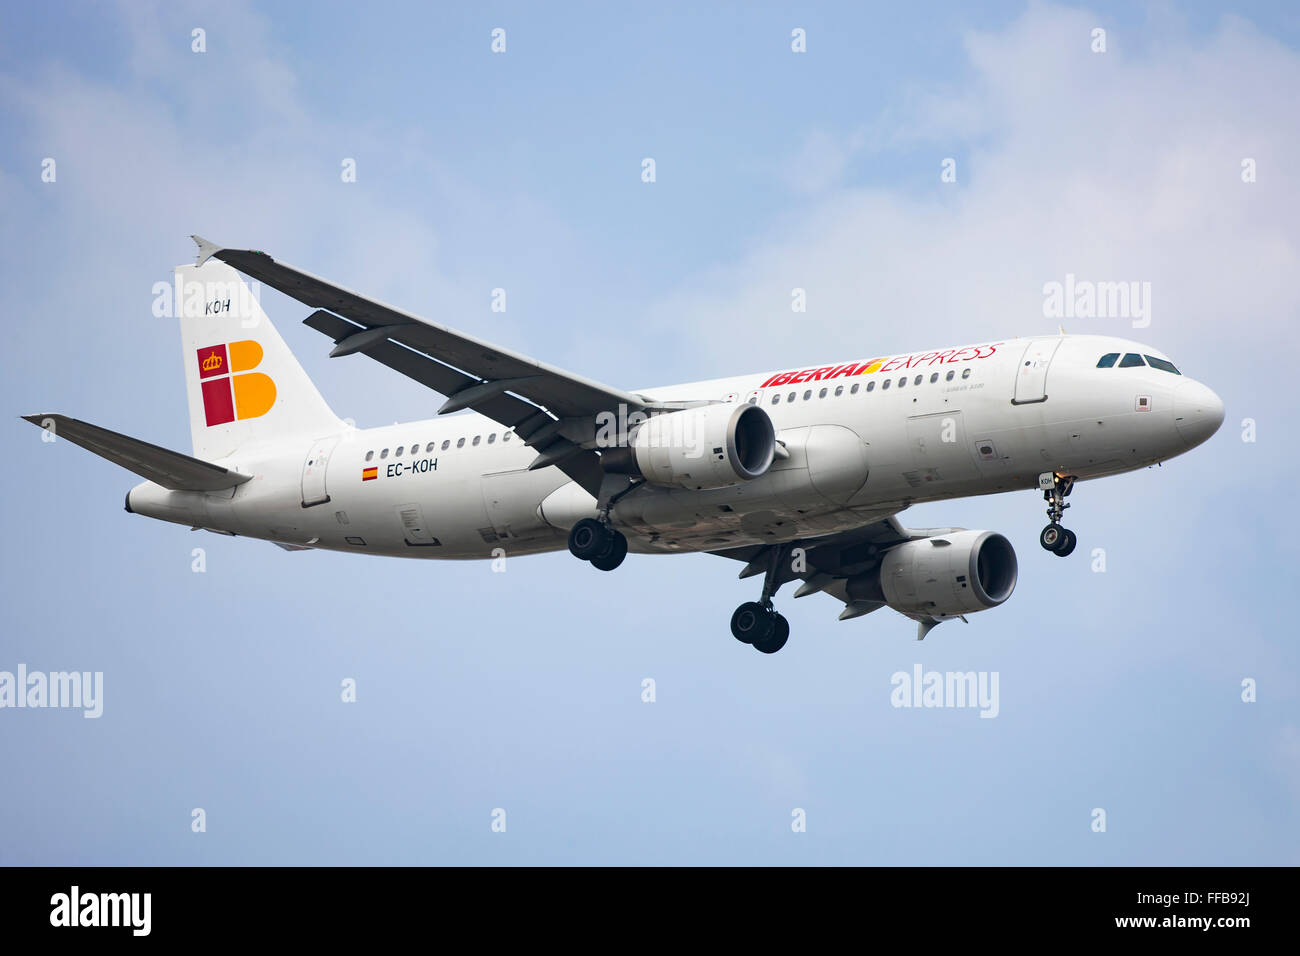 Iberia Express, airliner, Spanish airline, in flight Stock Photo